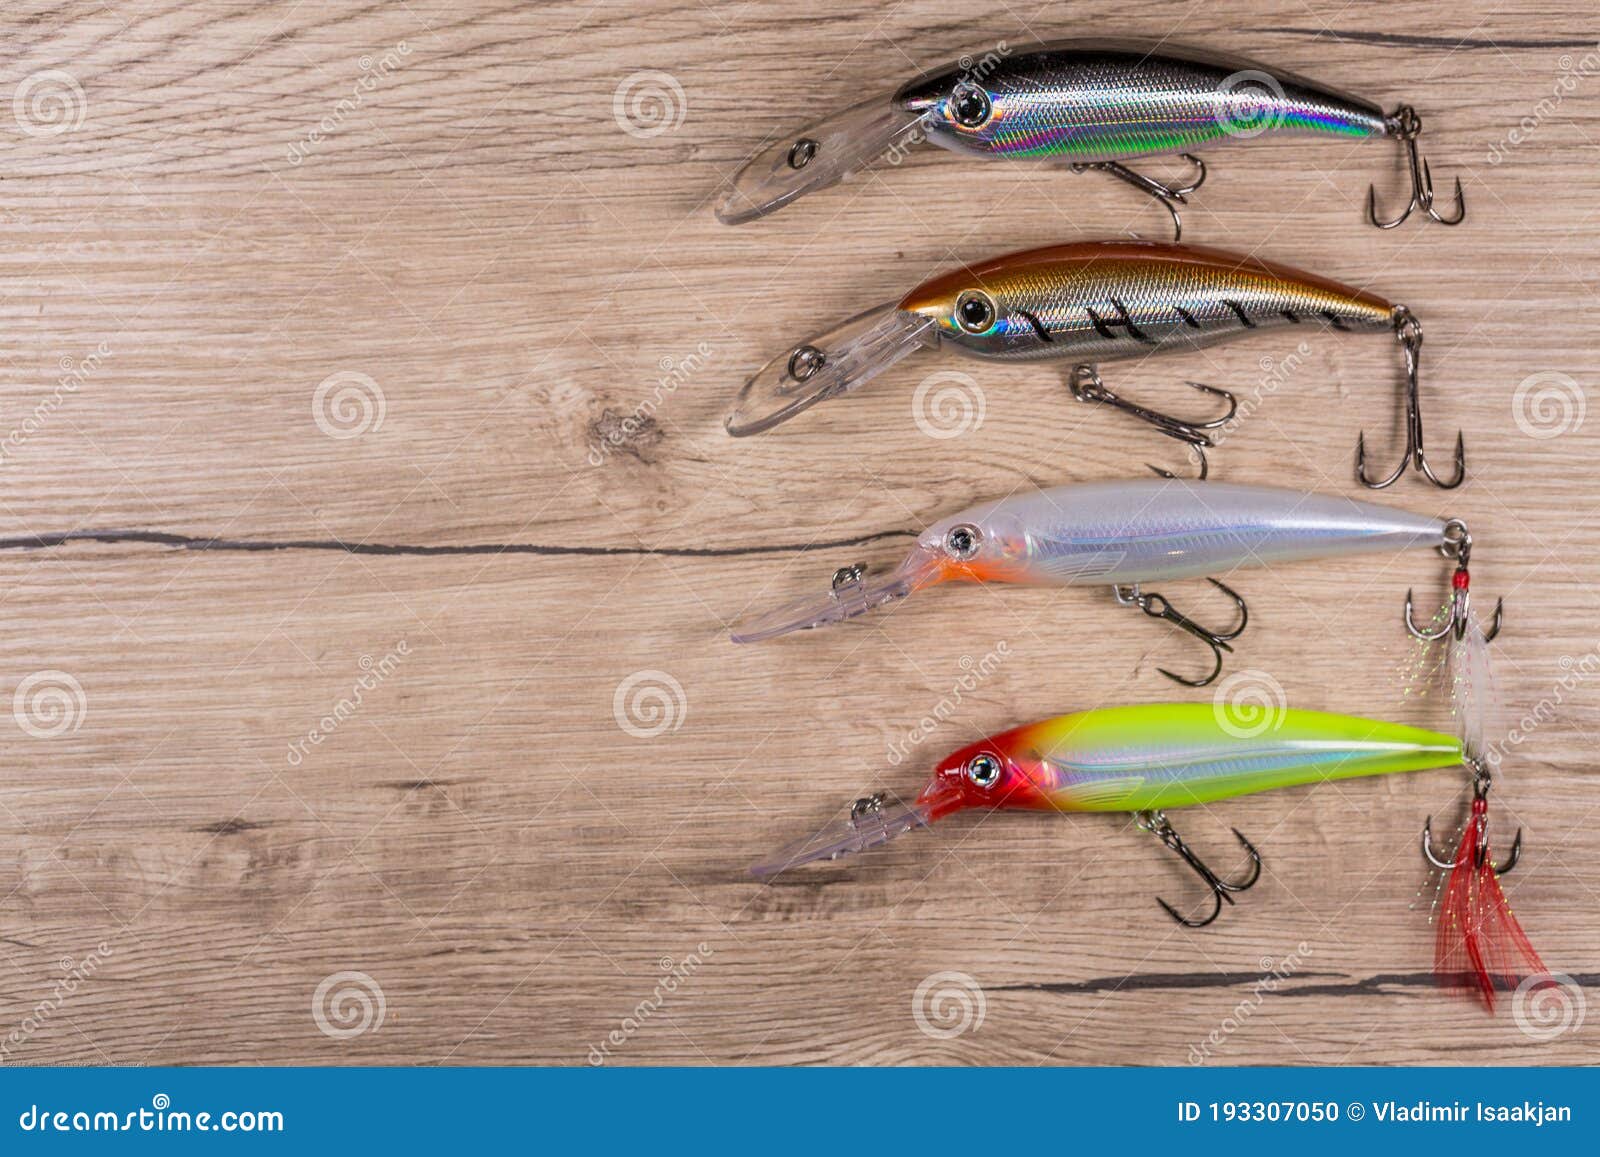 https://thumbs.dreamstime.com/z/spinner-lures-fishing-floats-wooden-desk-background-top-view-copy-space-193307050.jpg